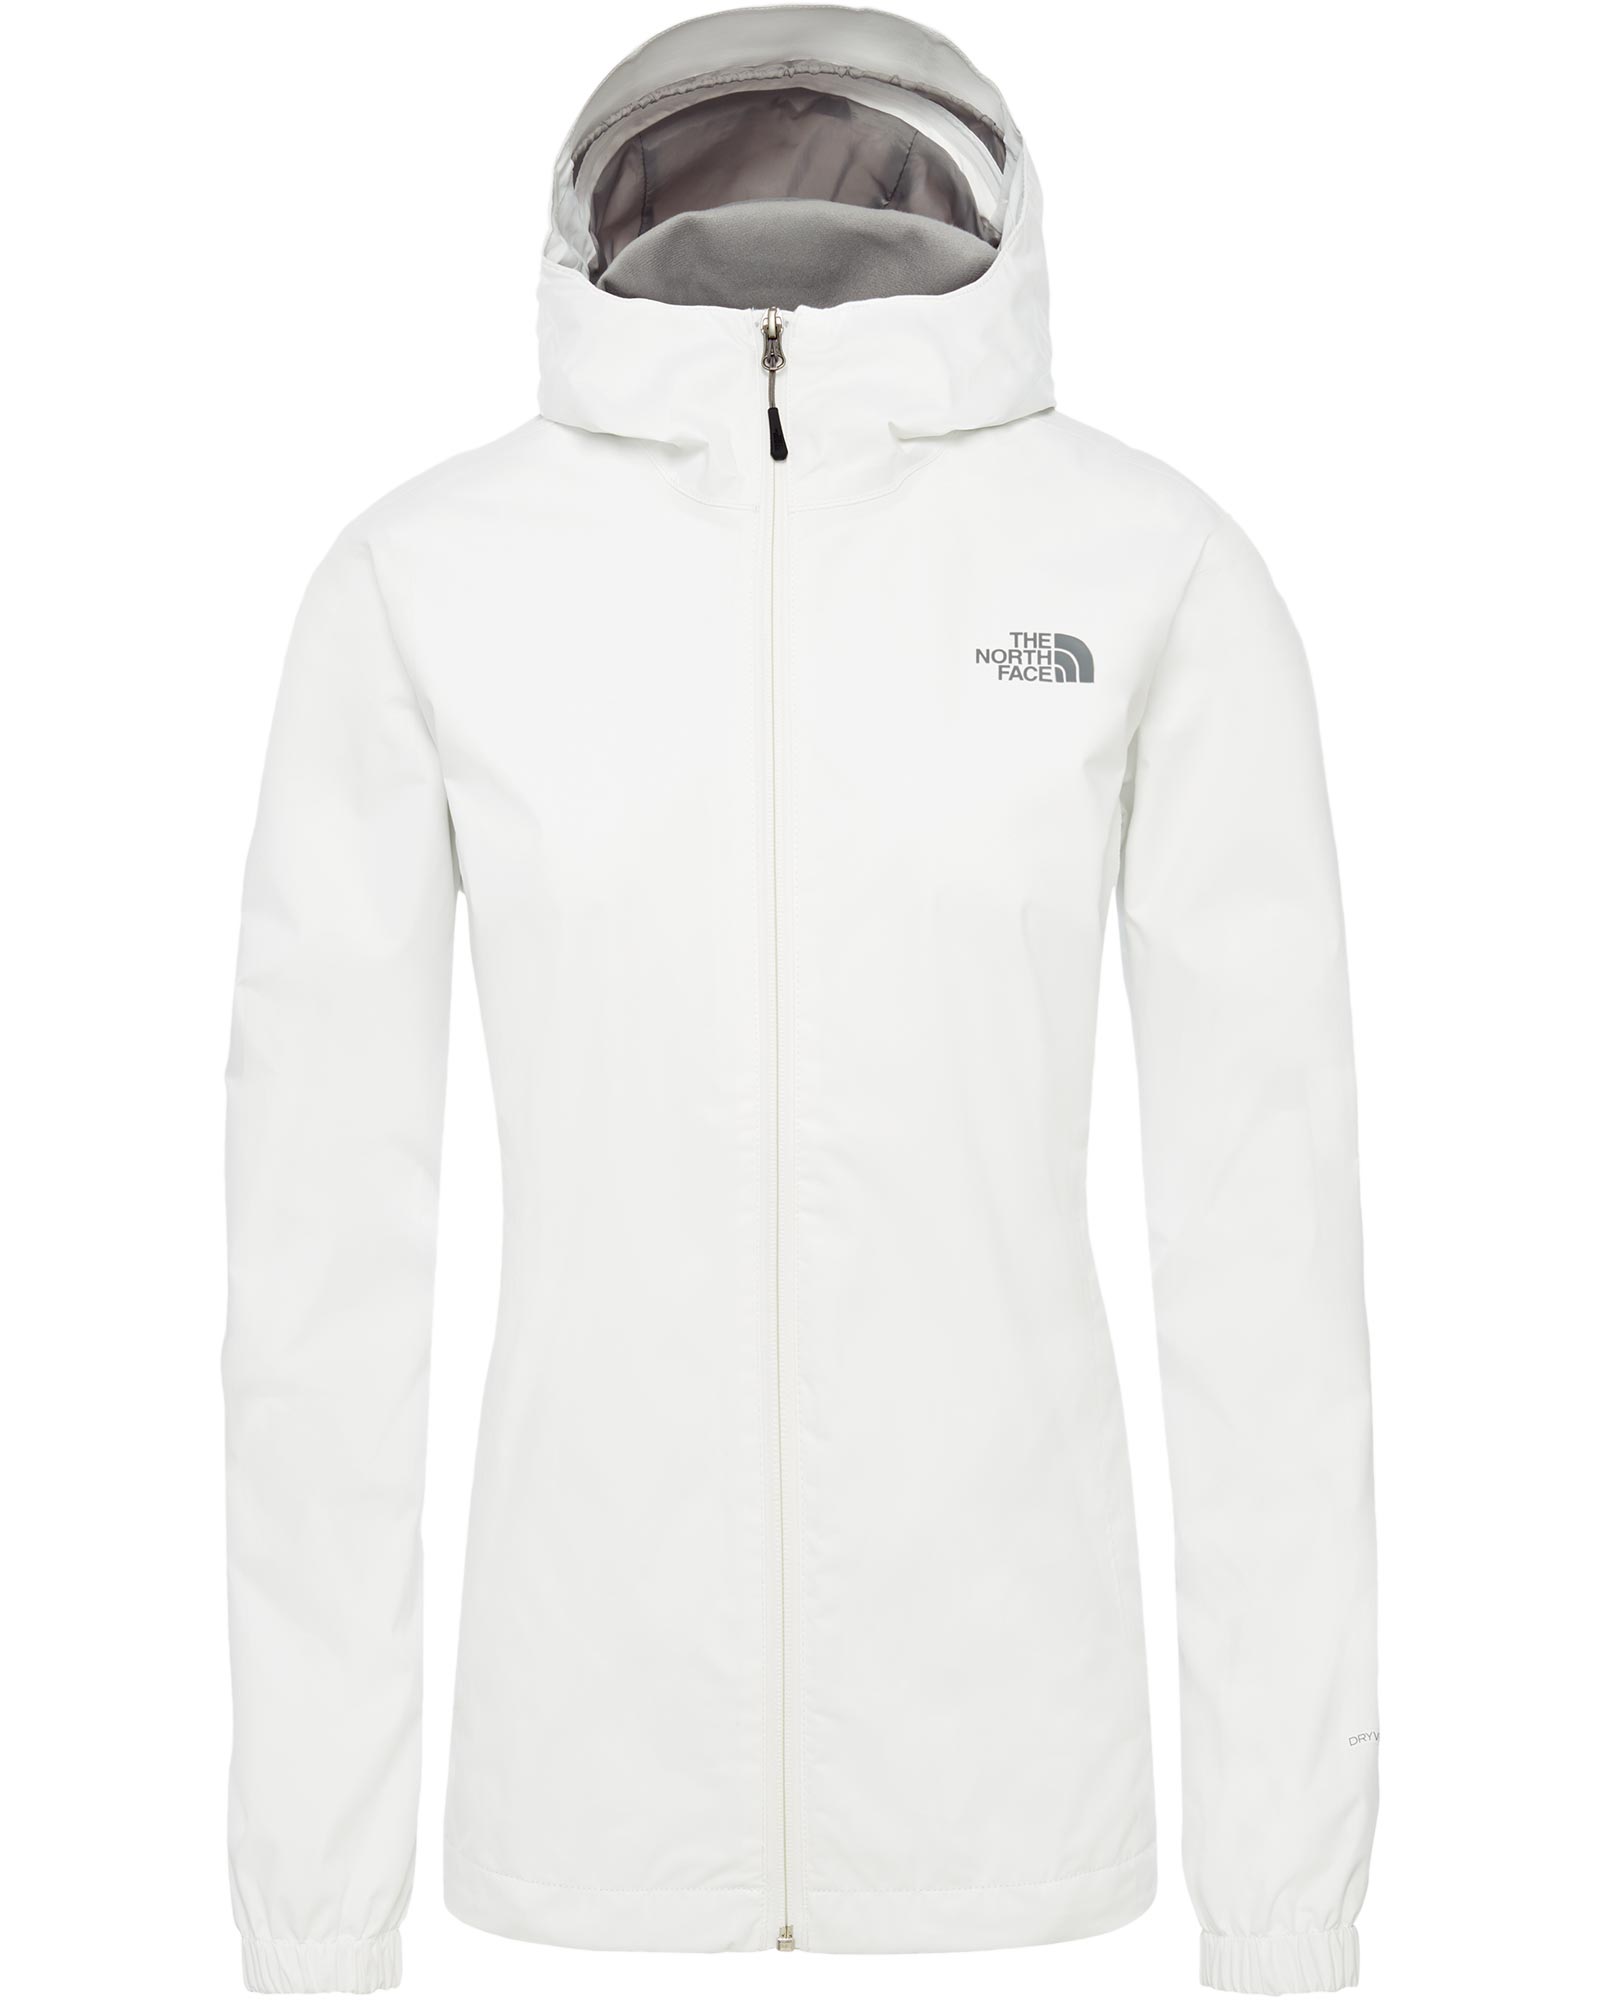 The North Face Quest DryVent Women’s Jacket - TNF White XS